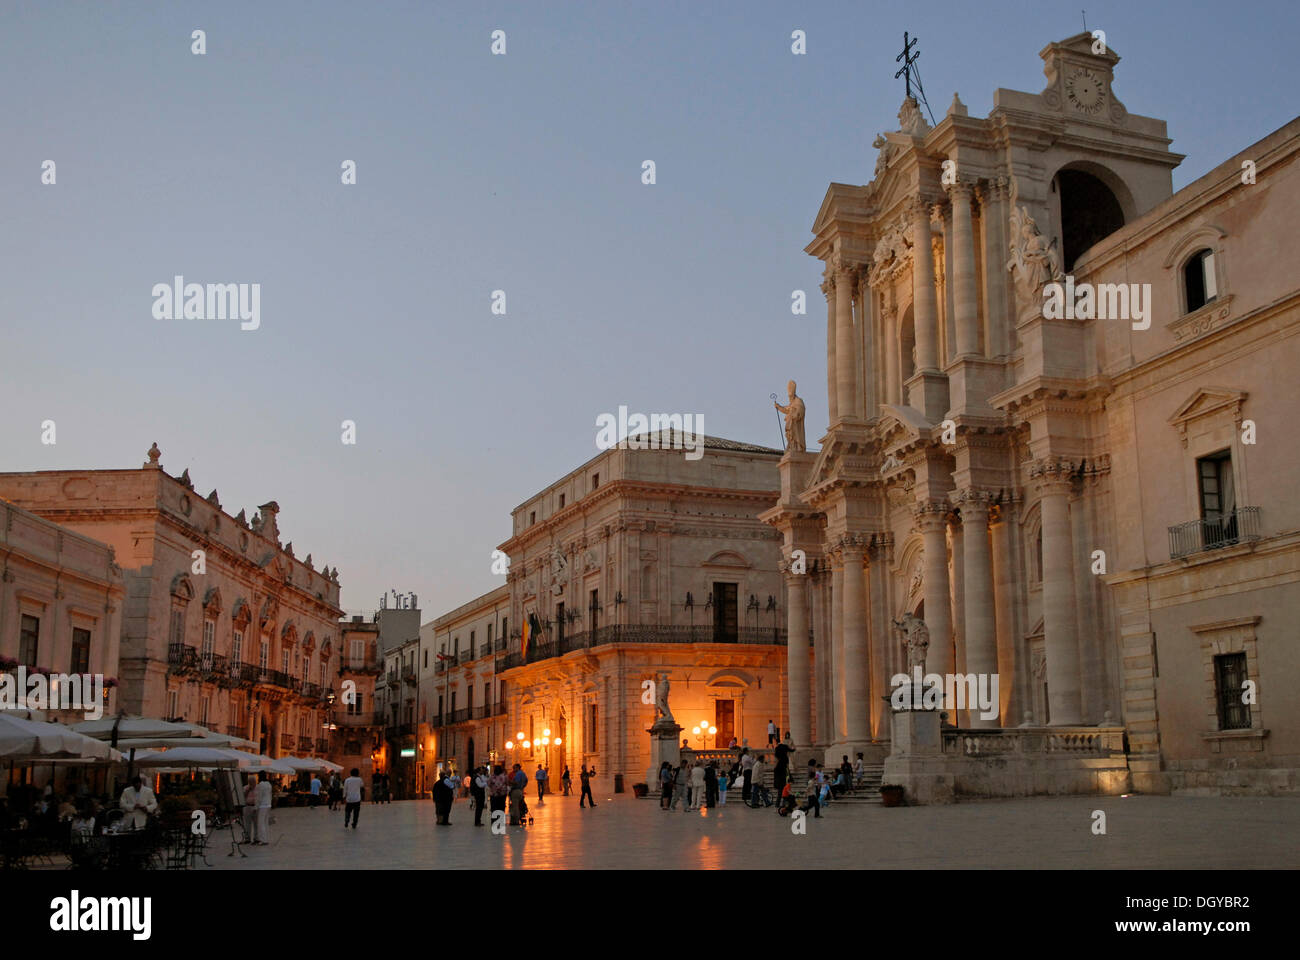 Cathedral square with the Cathedral of Santa Maria delle Colonne, St. Mary of the Columns, Piazza Duomo, Ortygia island Stock Photo